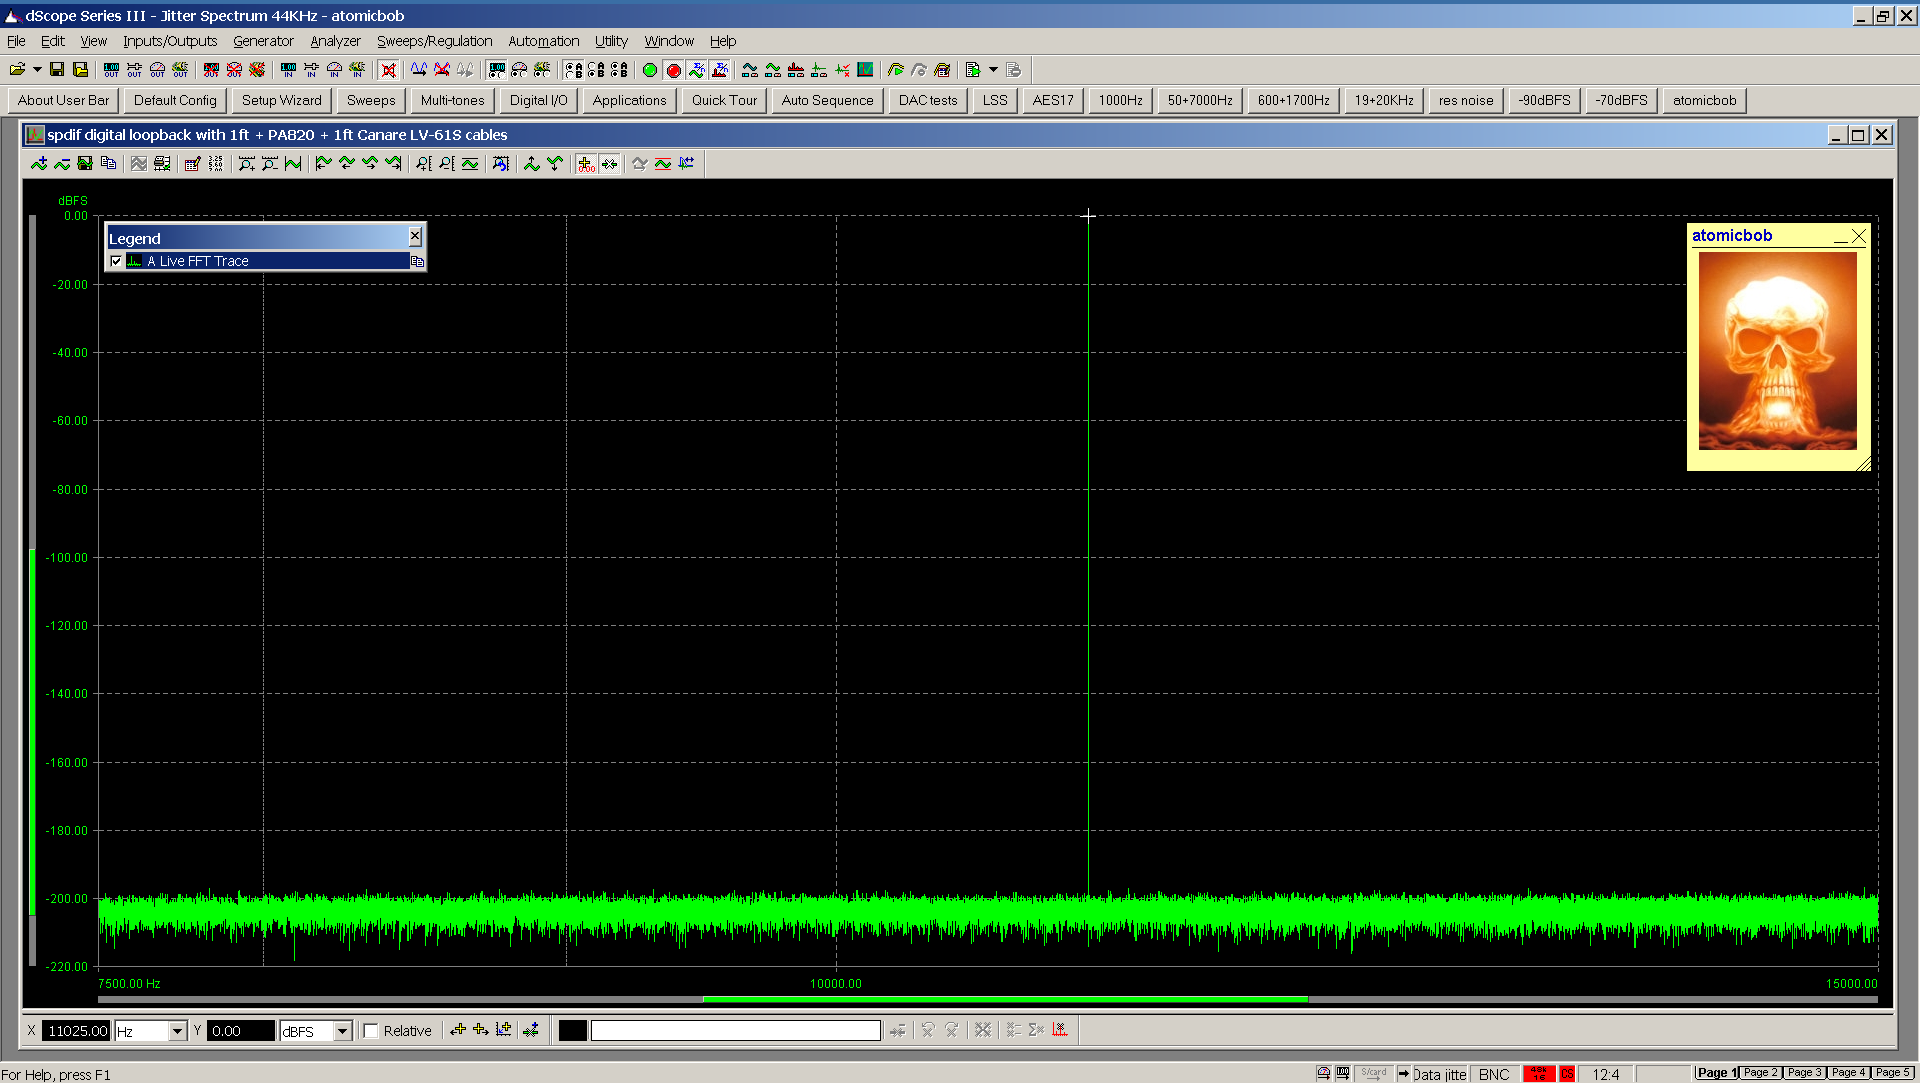 20201214 Inferred Jitter FFT - spdif loopback 1ft + PA820 + 1ft Canare LV-61S 44KHz.png